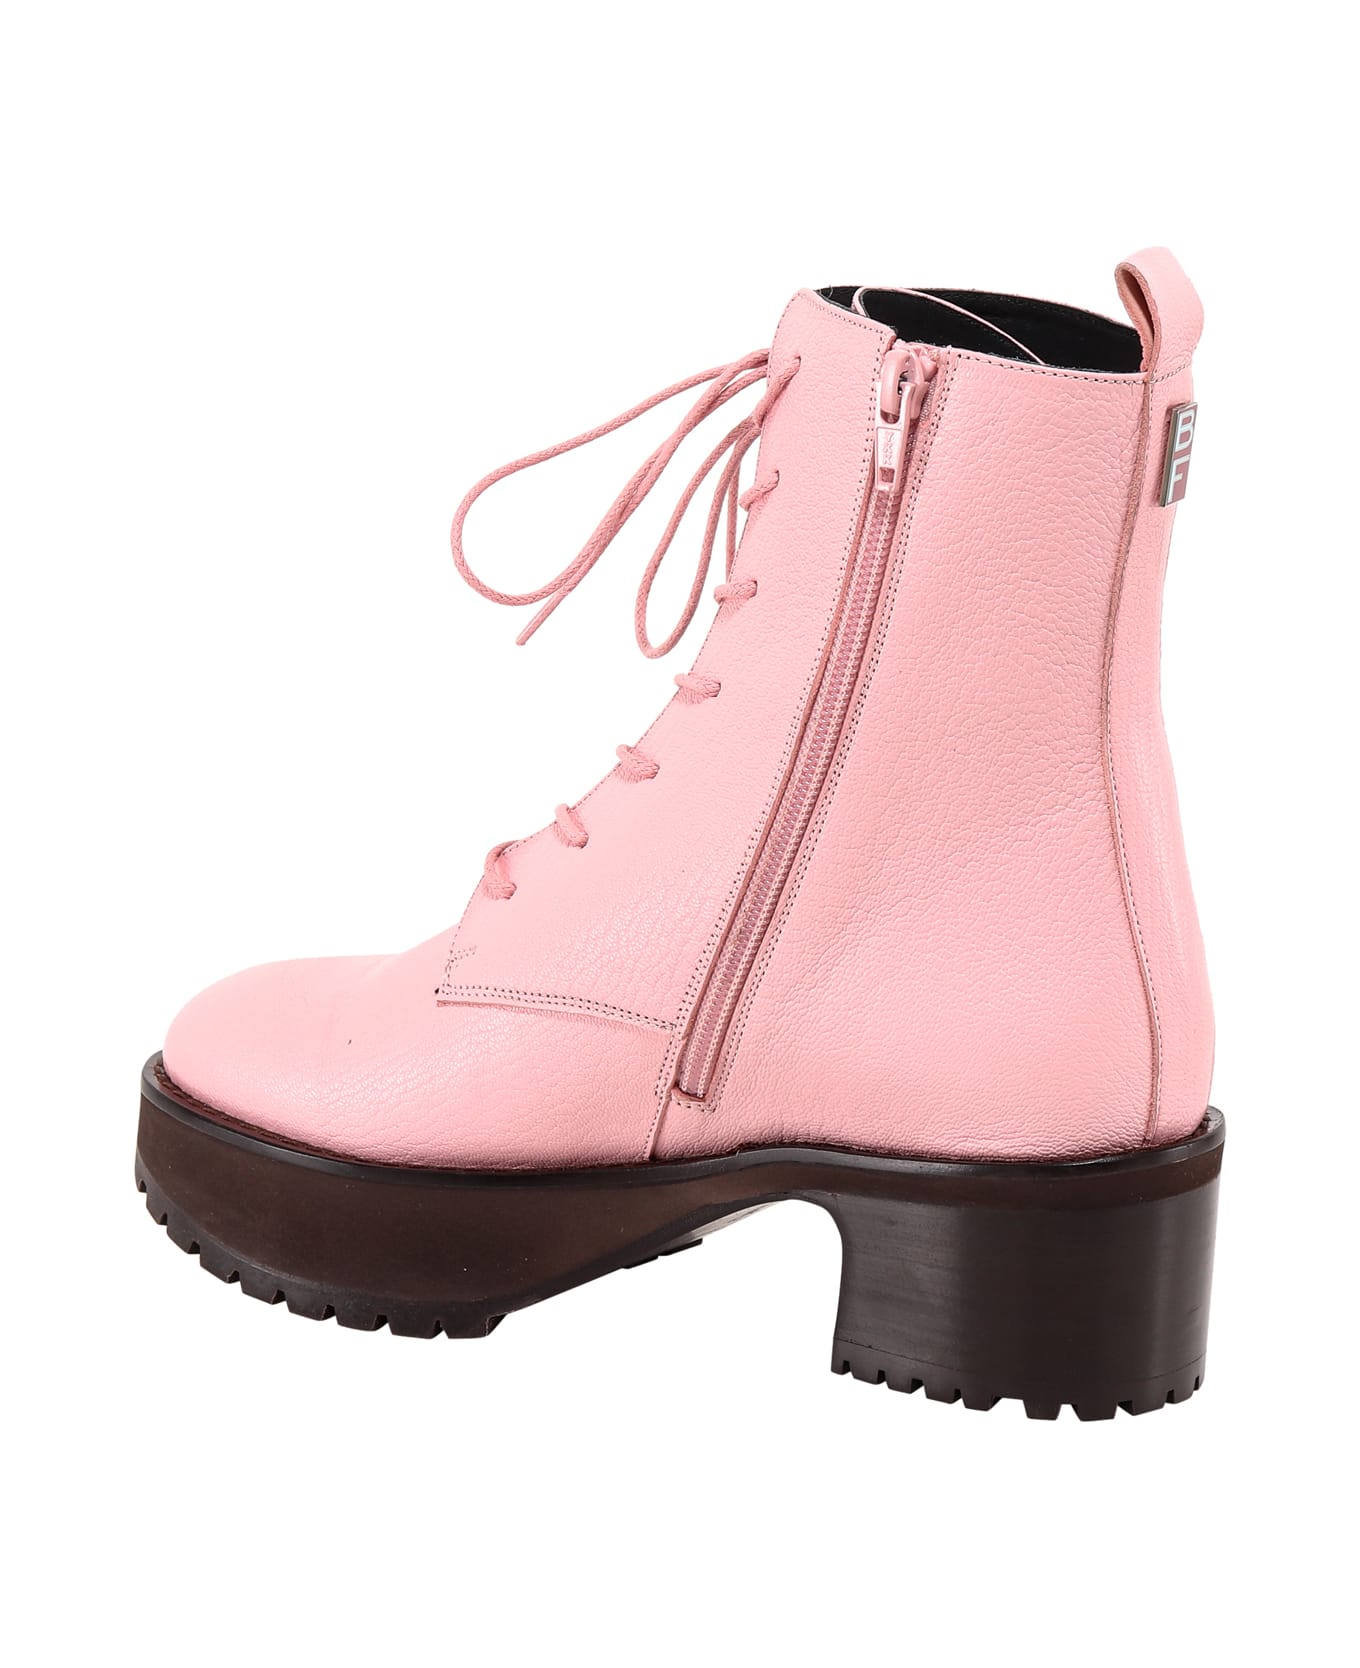 BY FAR Ankle Boots - Pink